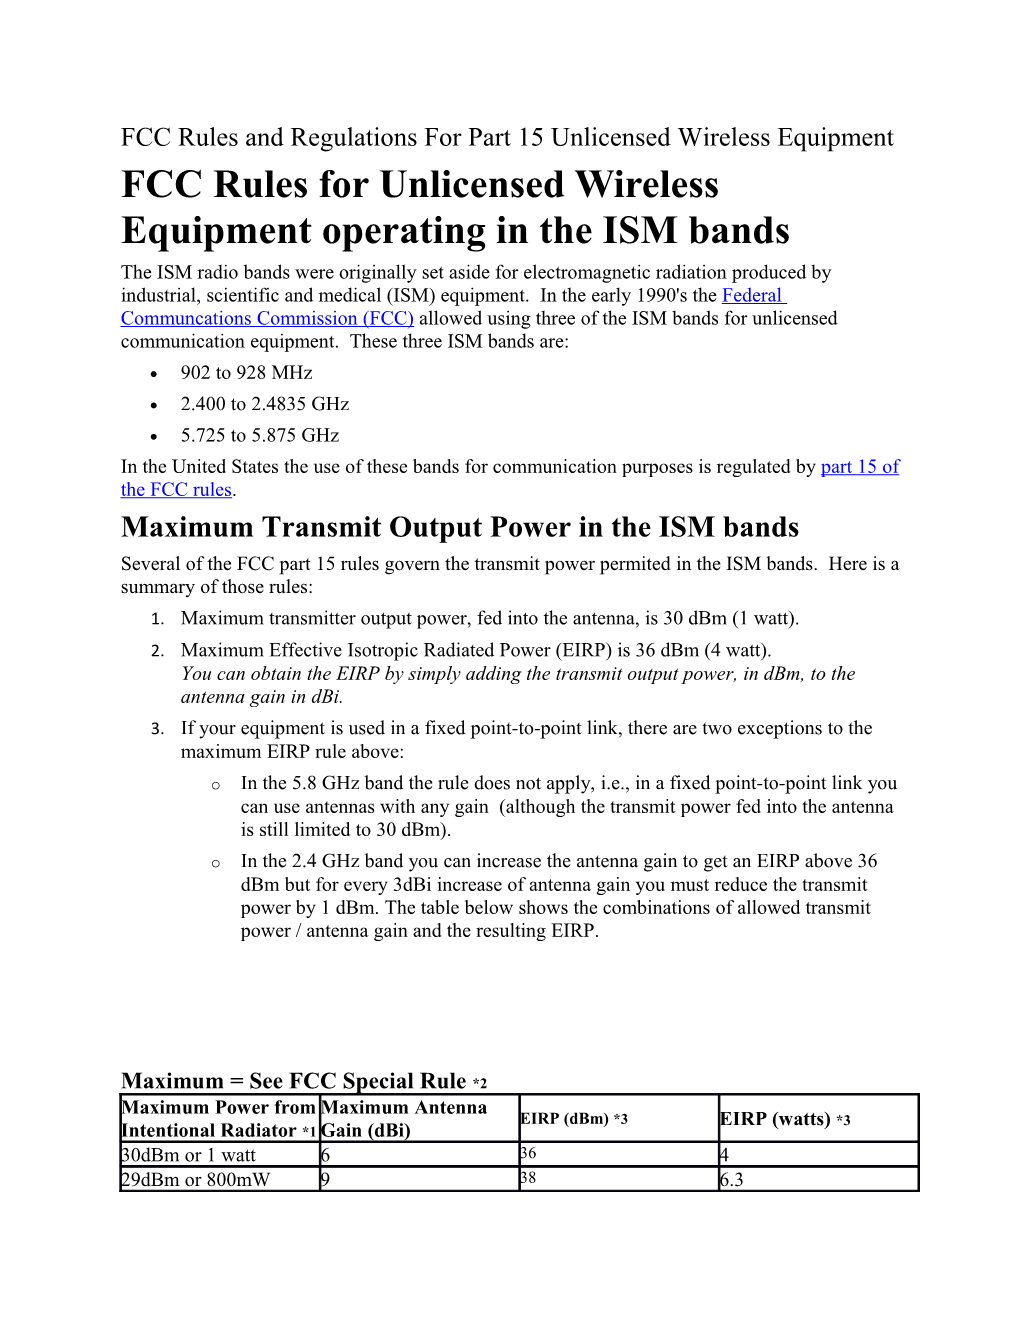 FCC Rules for Unlicensed Wireless Equipment Operating in the ISM Bands